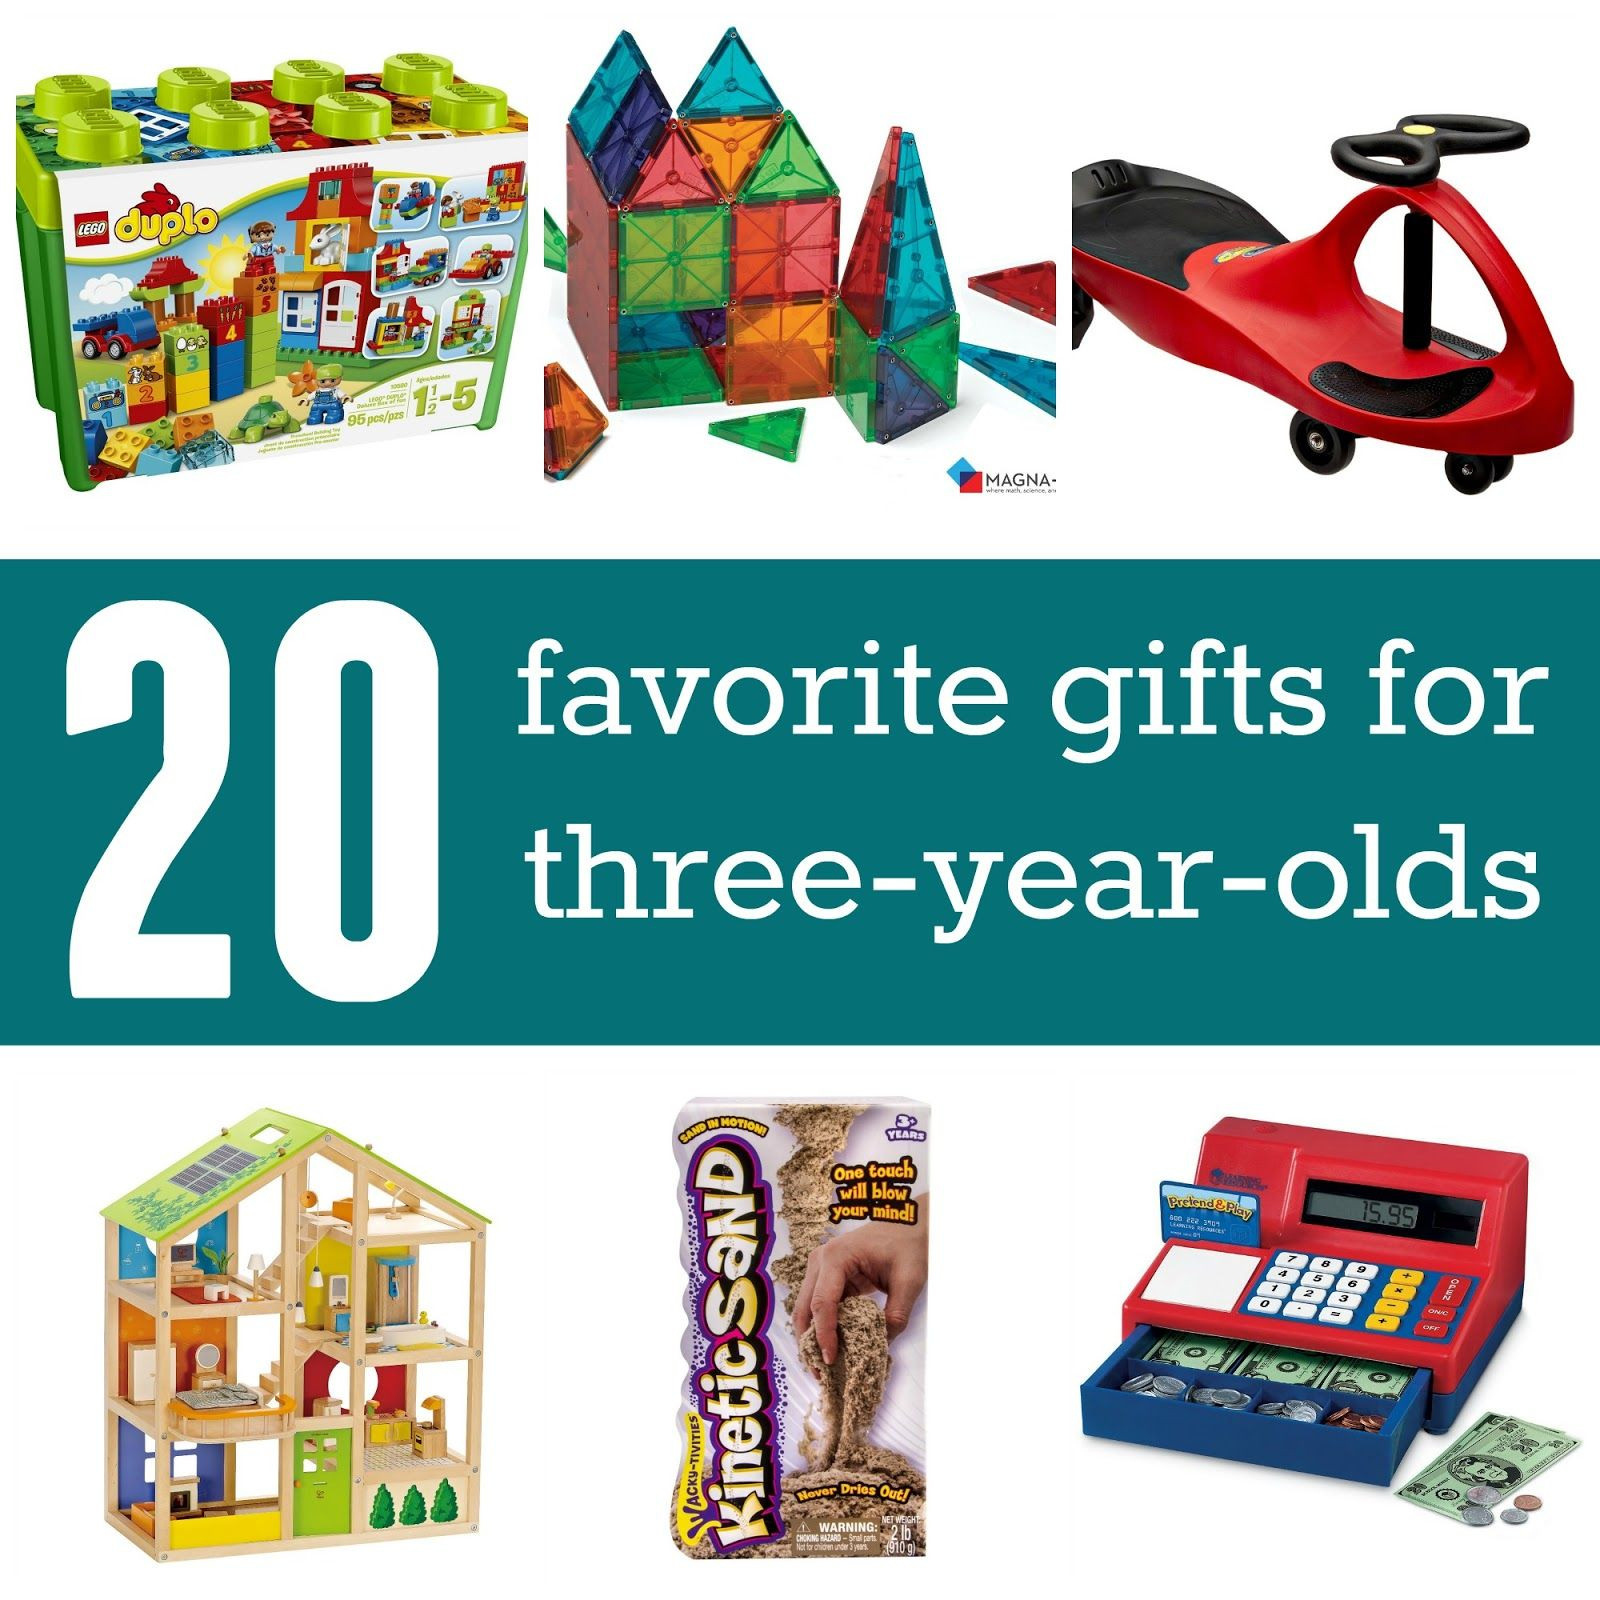 Birthday Gift Ideas 3 Year Old Boy
 Favorite Gifts for 3 year olds